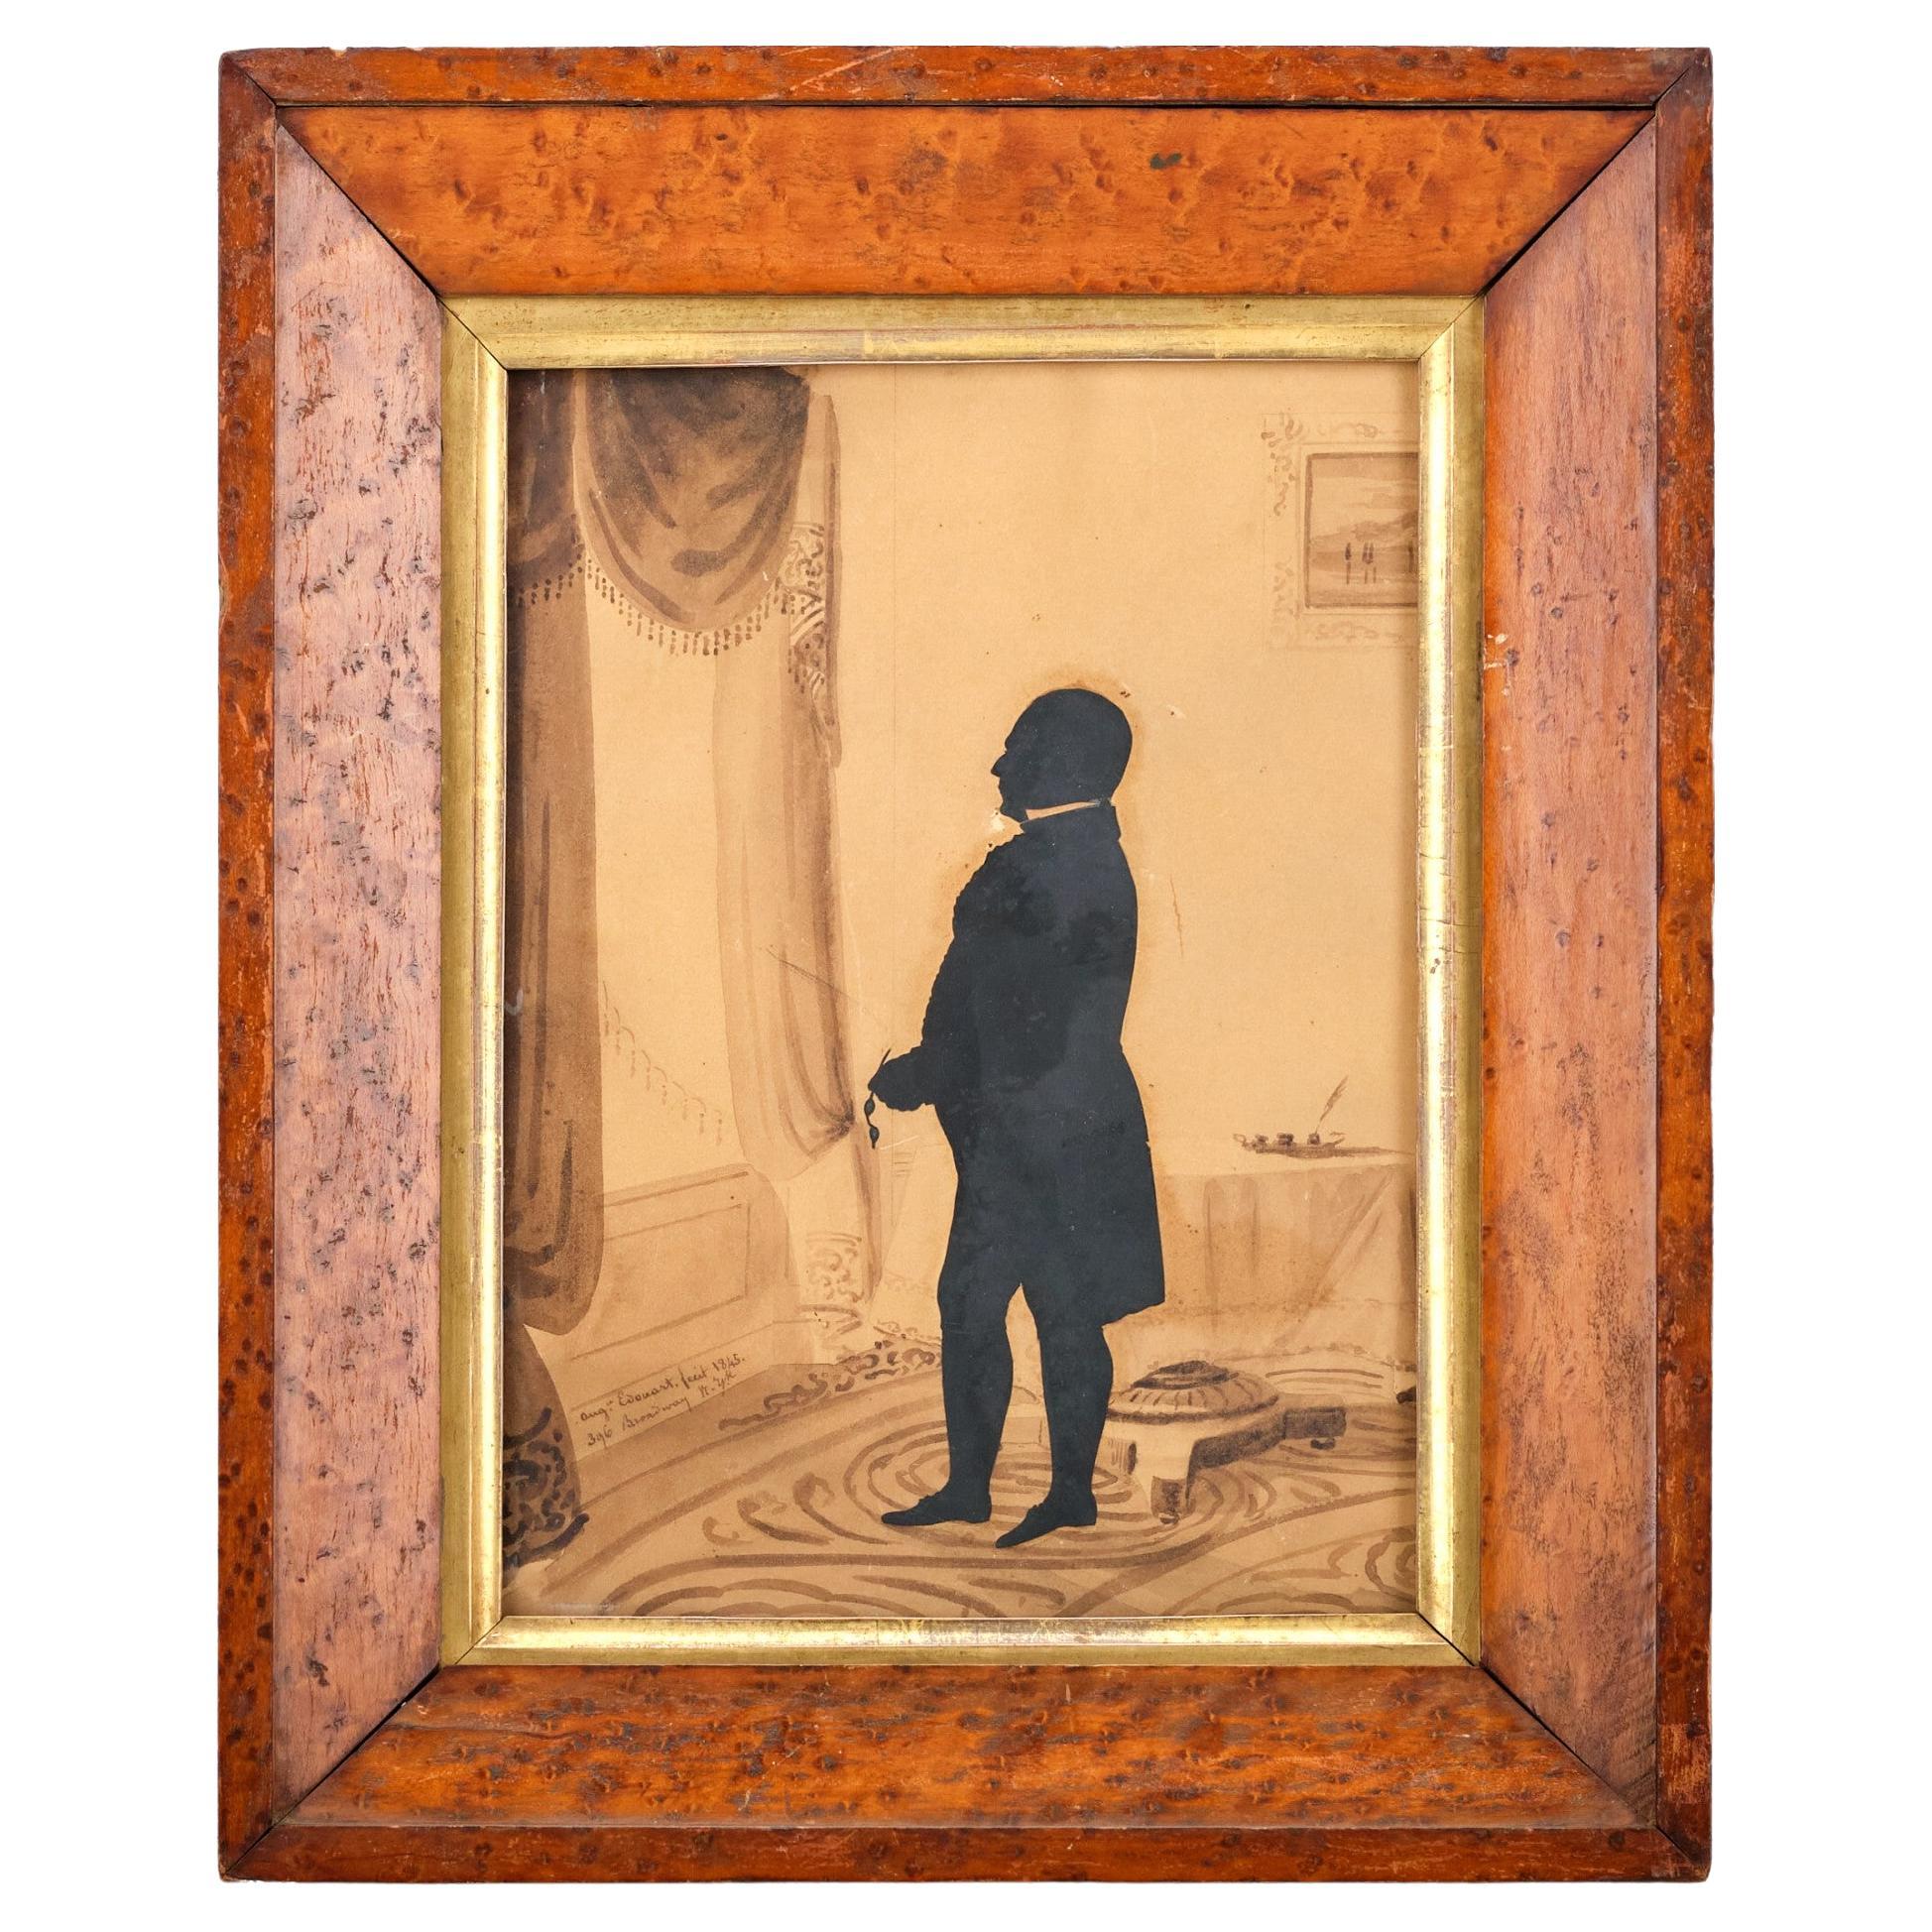 American Classical Period Scissor-Cut Silhouette by Auguste Edouart, Dated 1845 For Sale